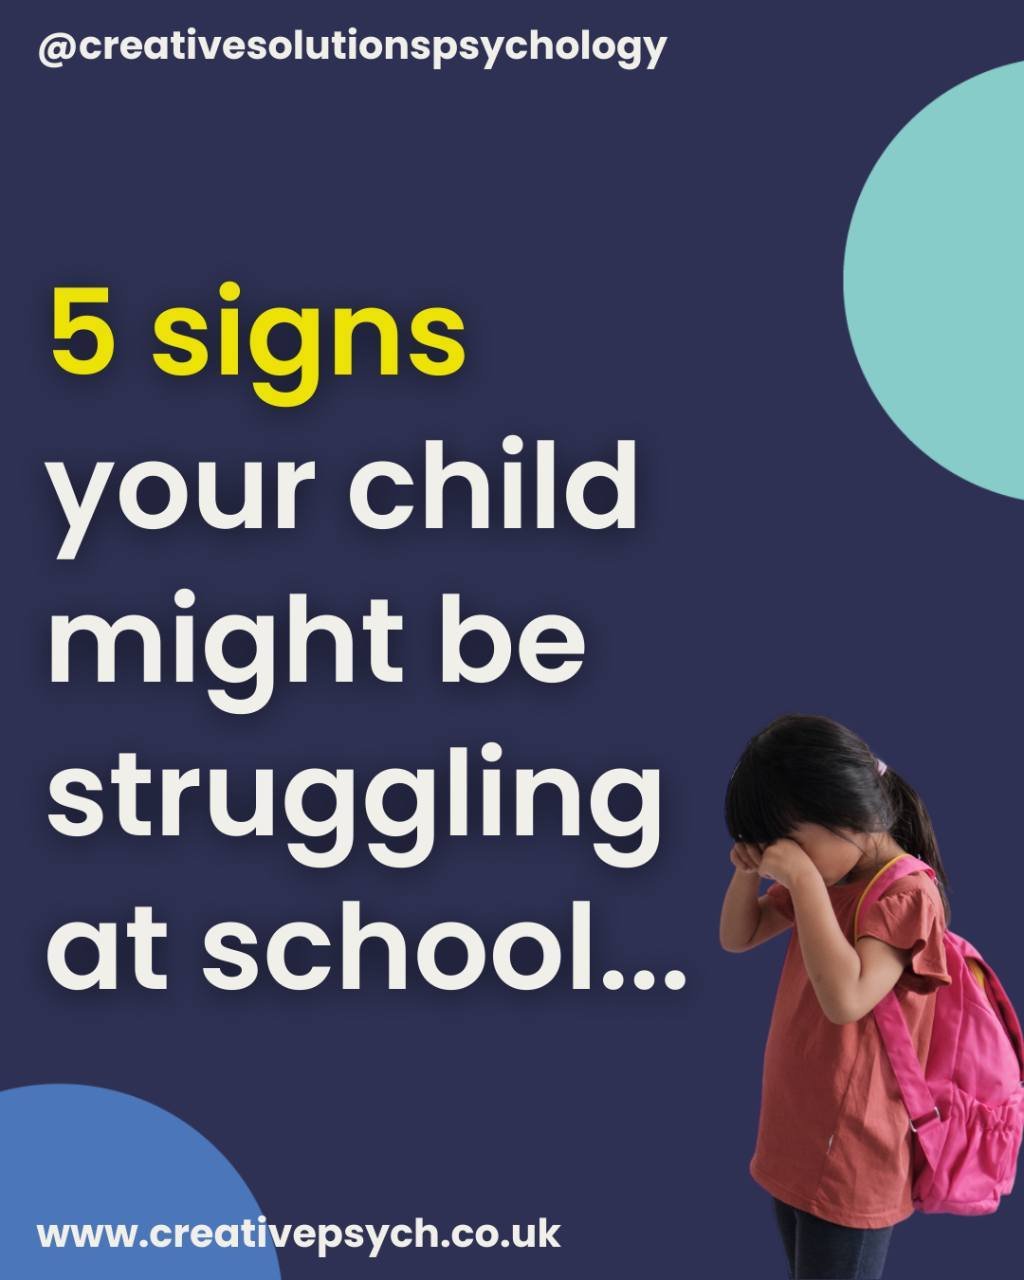 As a child and educational psychologist, it's crucial to recognise the early signs indicating a child might be struggling at school. 

These struggles can be academic, social, emotional, or a combination. Identifying these signs early can lead to tim